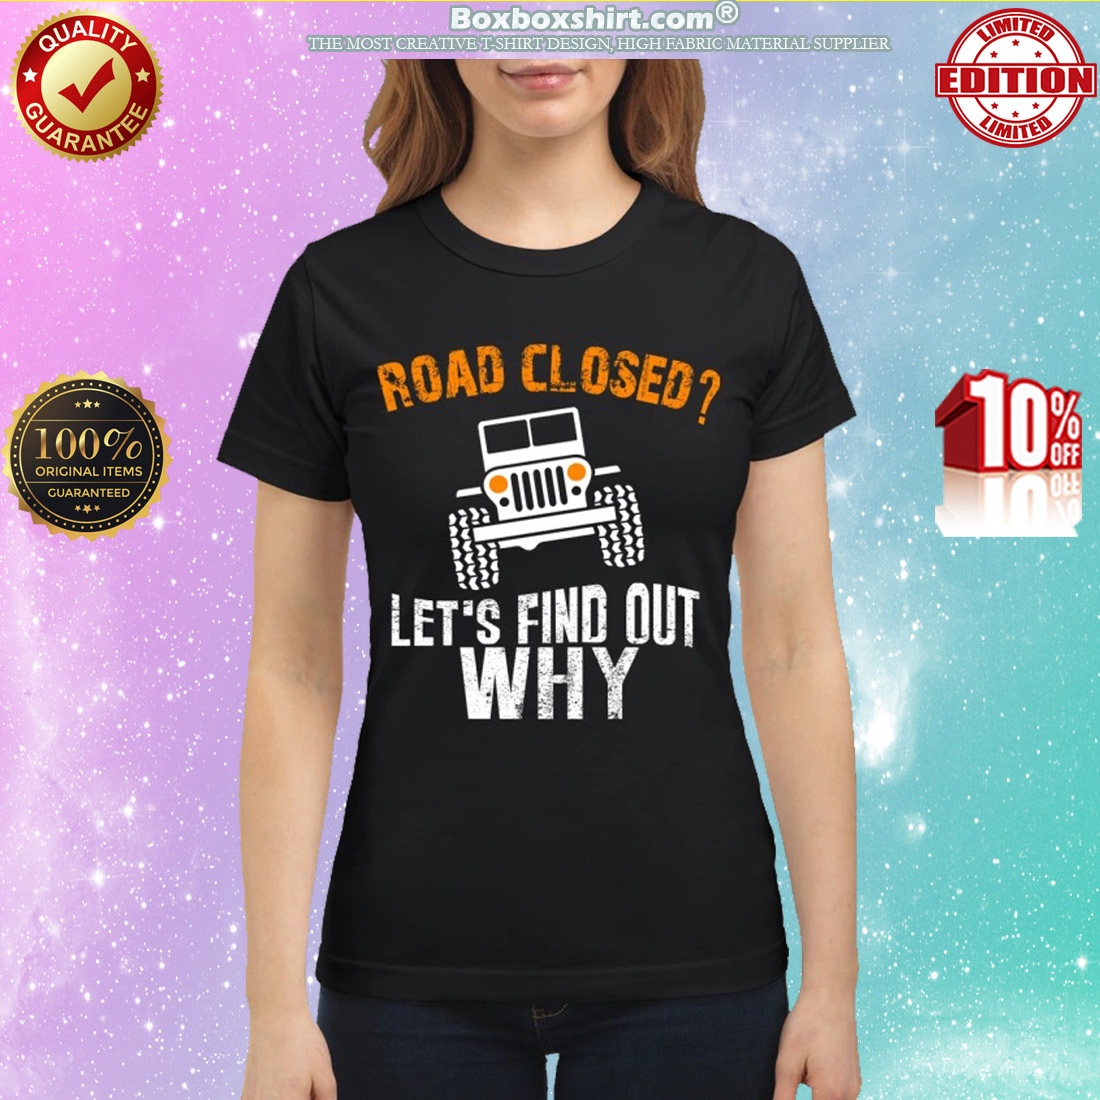 Road close let's find out why classic shirt